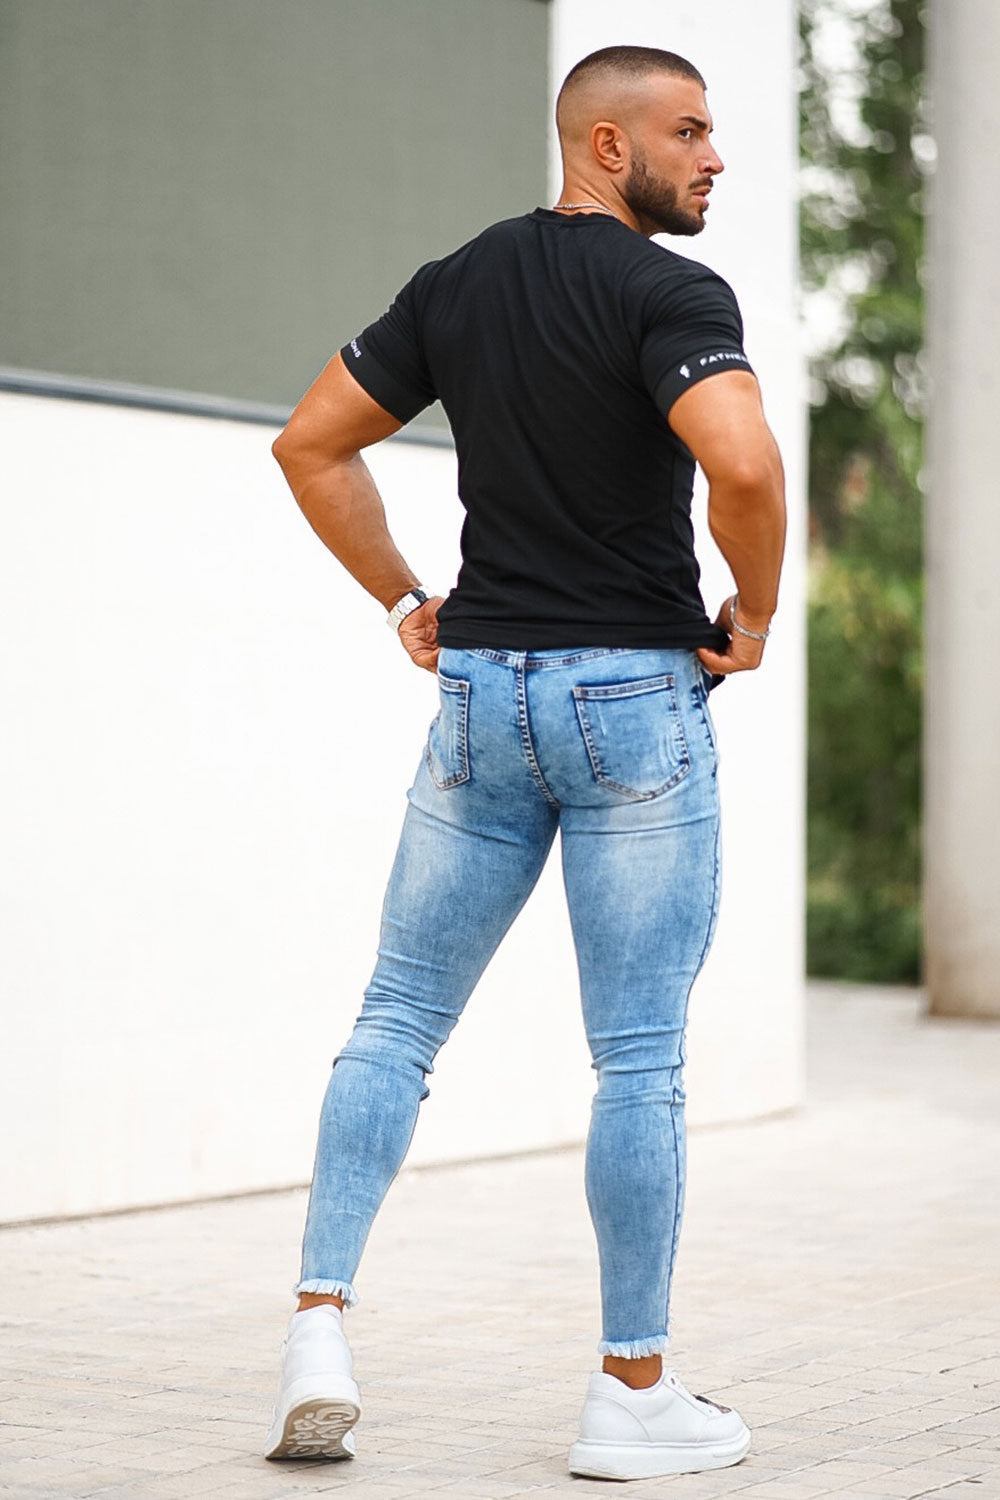 XFLWAM Ripped Jeans for Men Slim Fit Stretch Denim Distressed Destroyed Pants  Mens Jeans with Hole Dark Gray M - Walmart.com